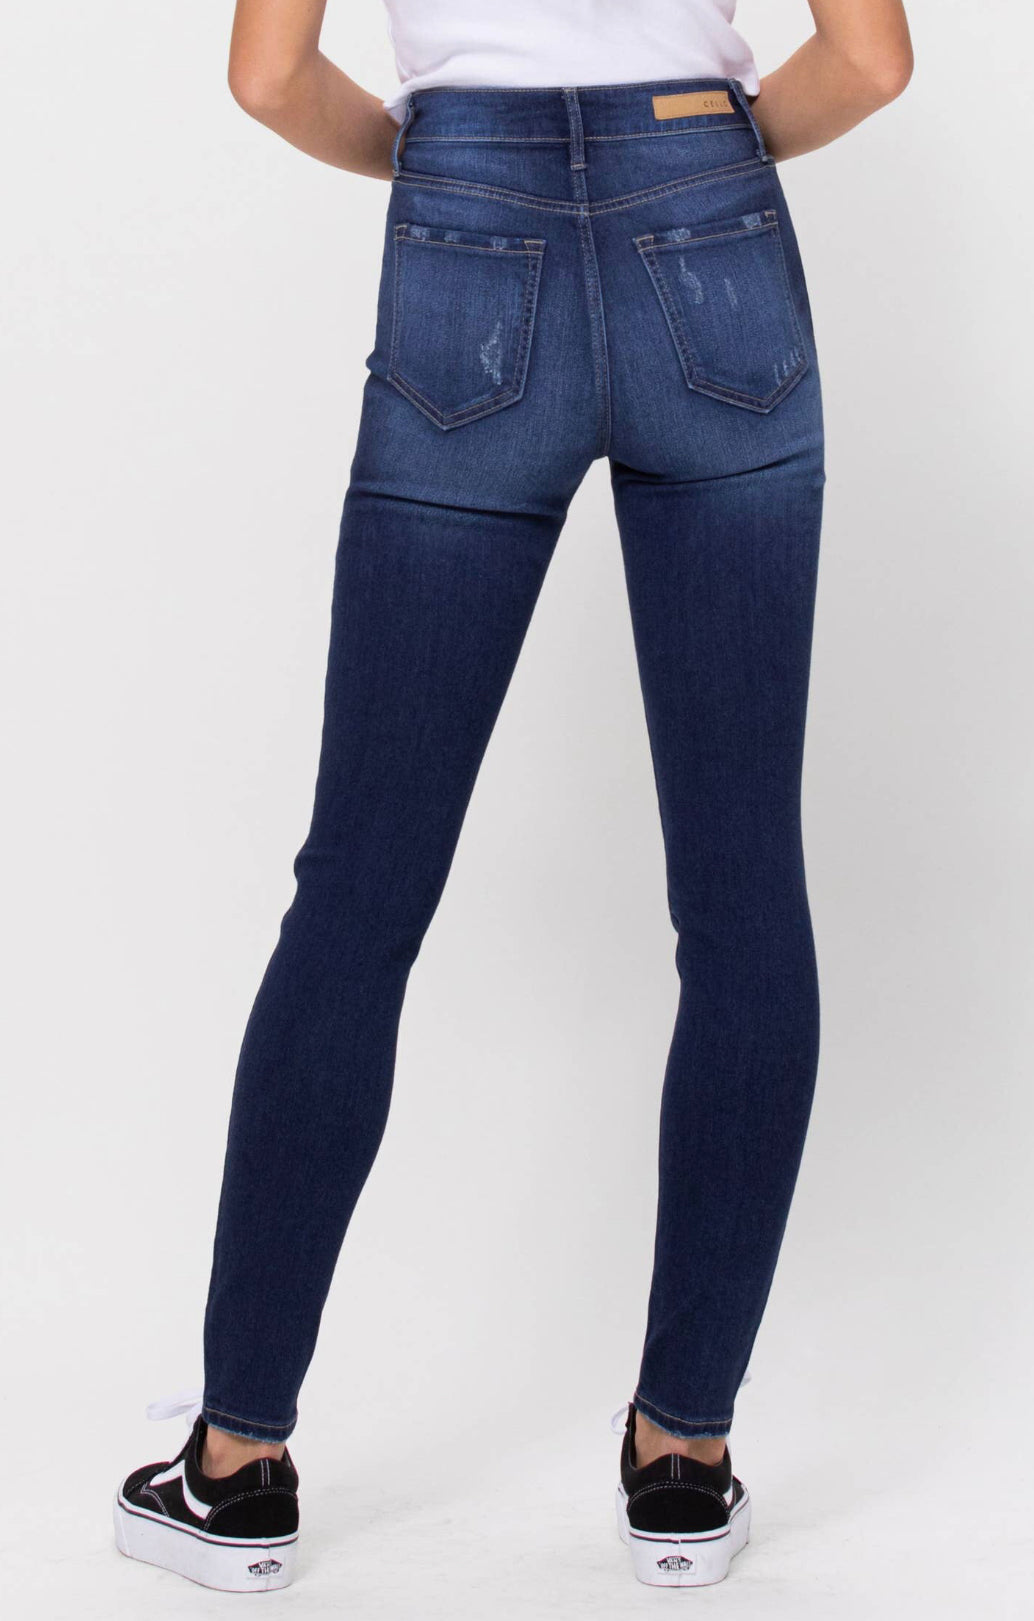 Cello Jessie High Rise Skinny Jeans